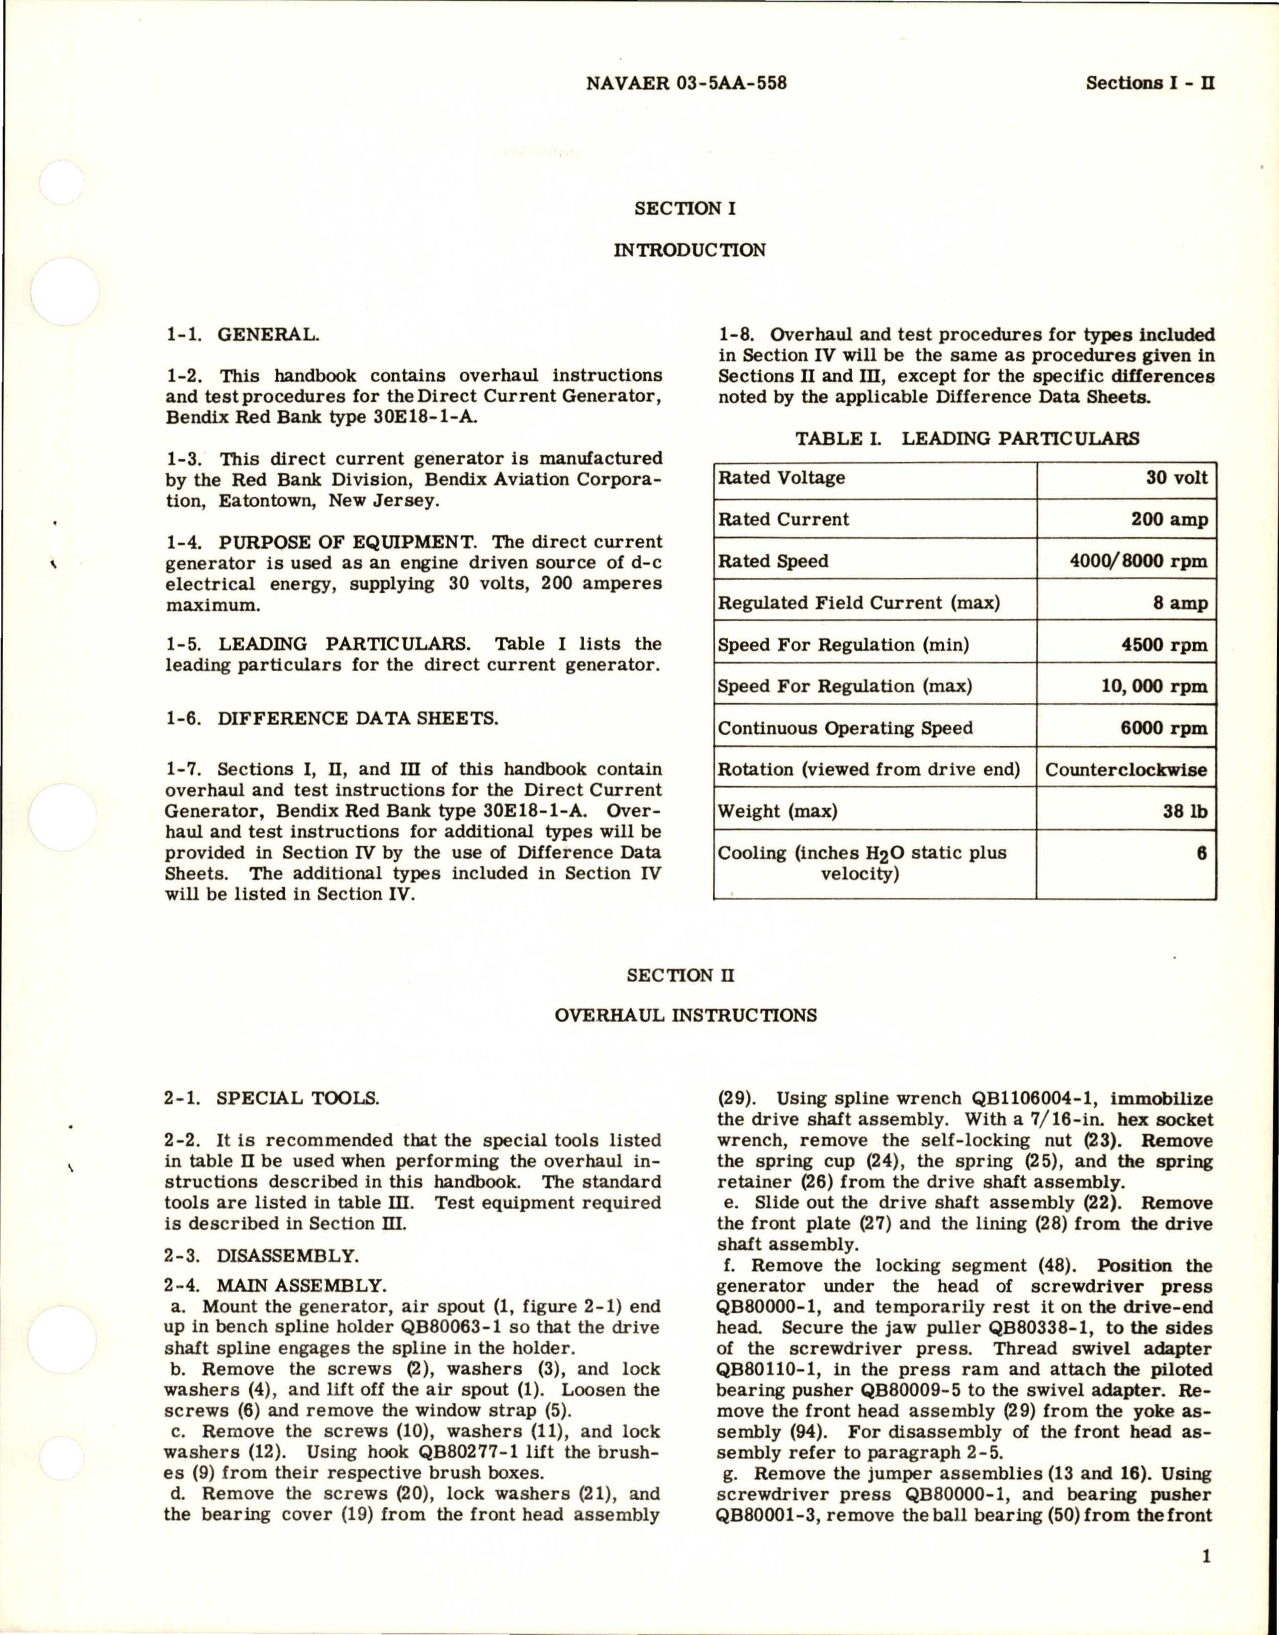 Sample page 5 from AirCorps Library document: Overhaul Instructions for Direct Current Generator - Part 30E18-1-A